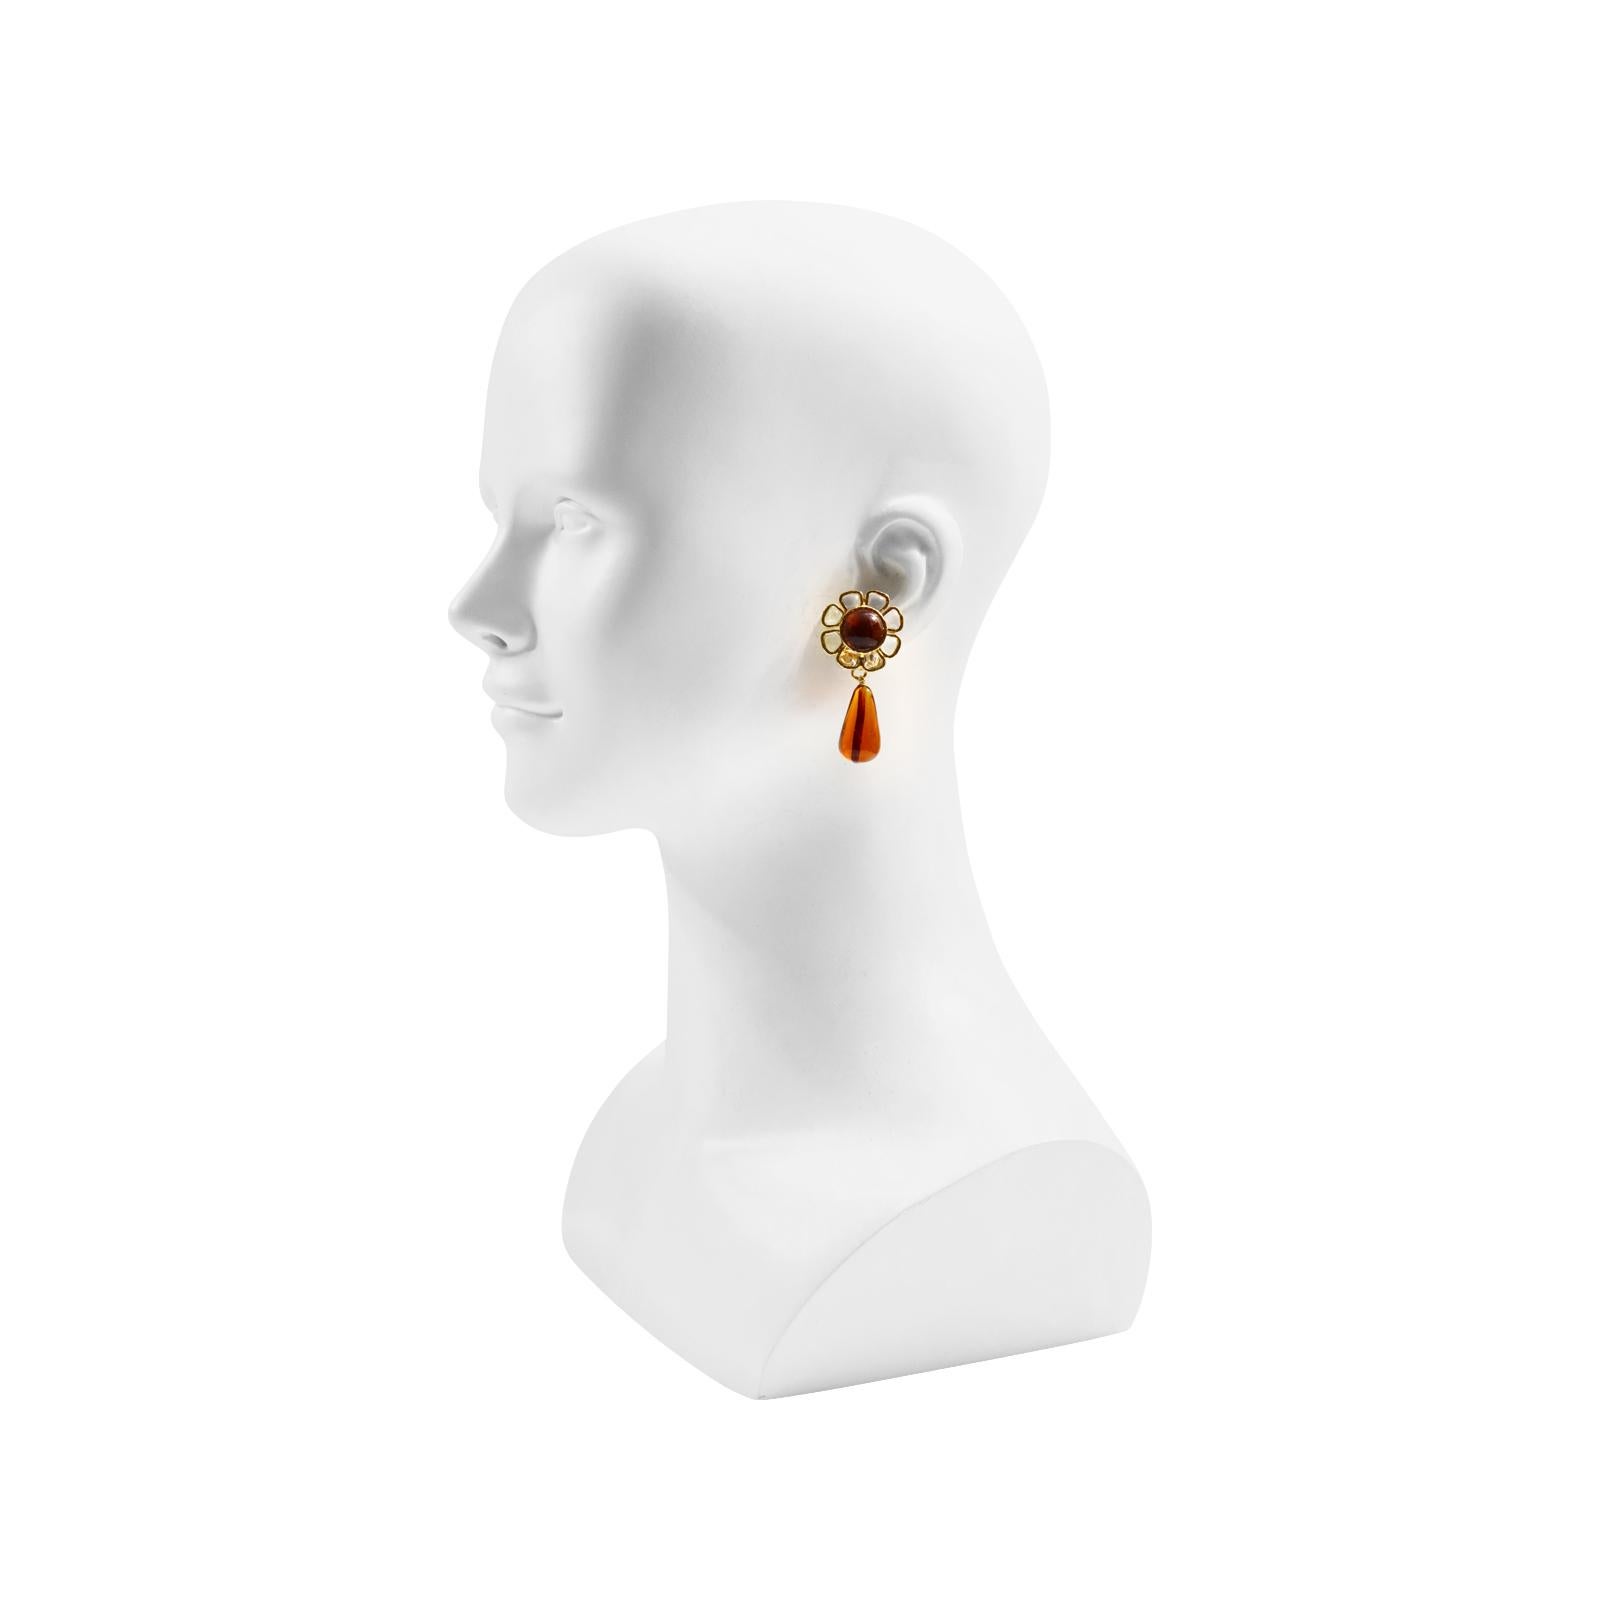 Maison Gripoix Vintage Clear and Muted Red/Orange Flower Dangling Earrings set in gold tone. Always a Classic and will always be relevant in your wardrobe. These are so classic but with an edge!

Guy de Maupassant wrote a famous story about a